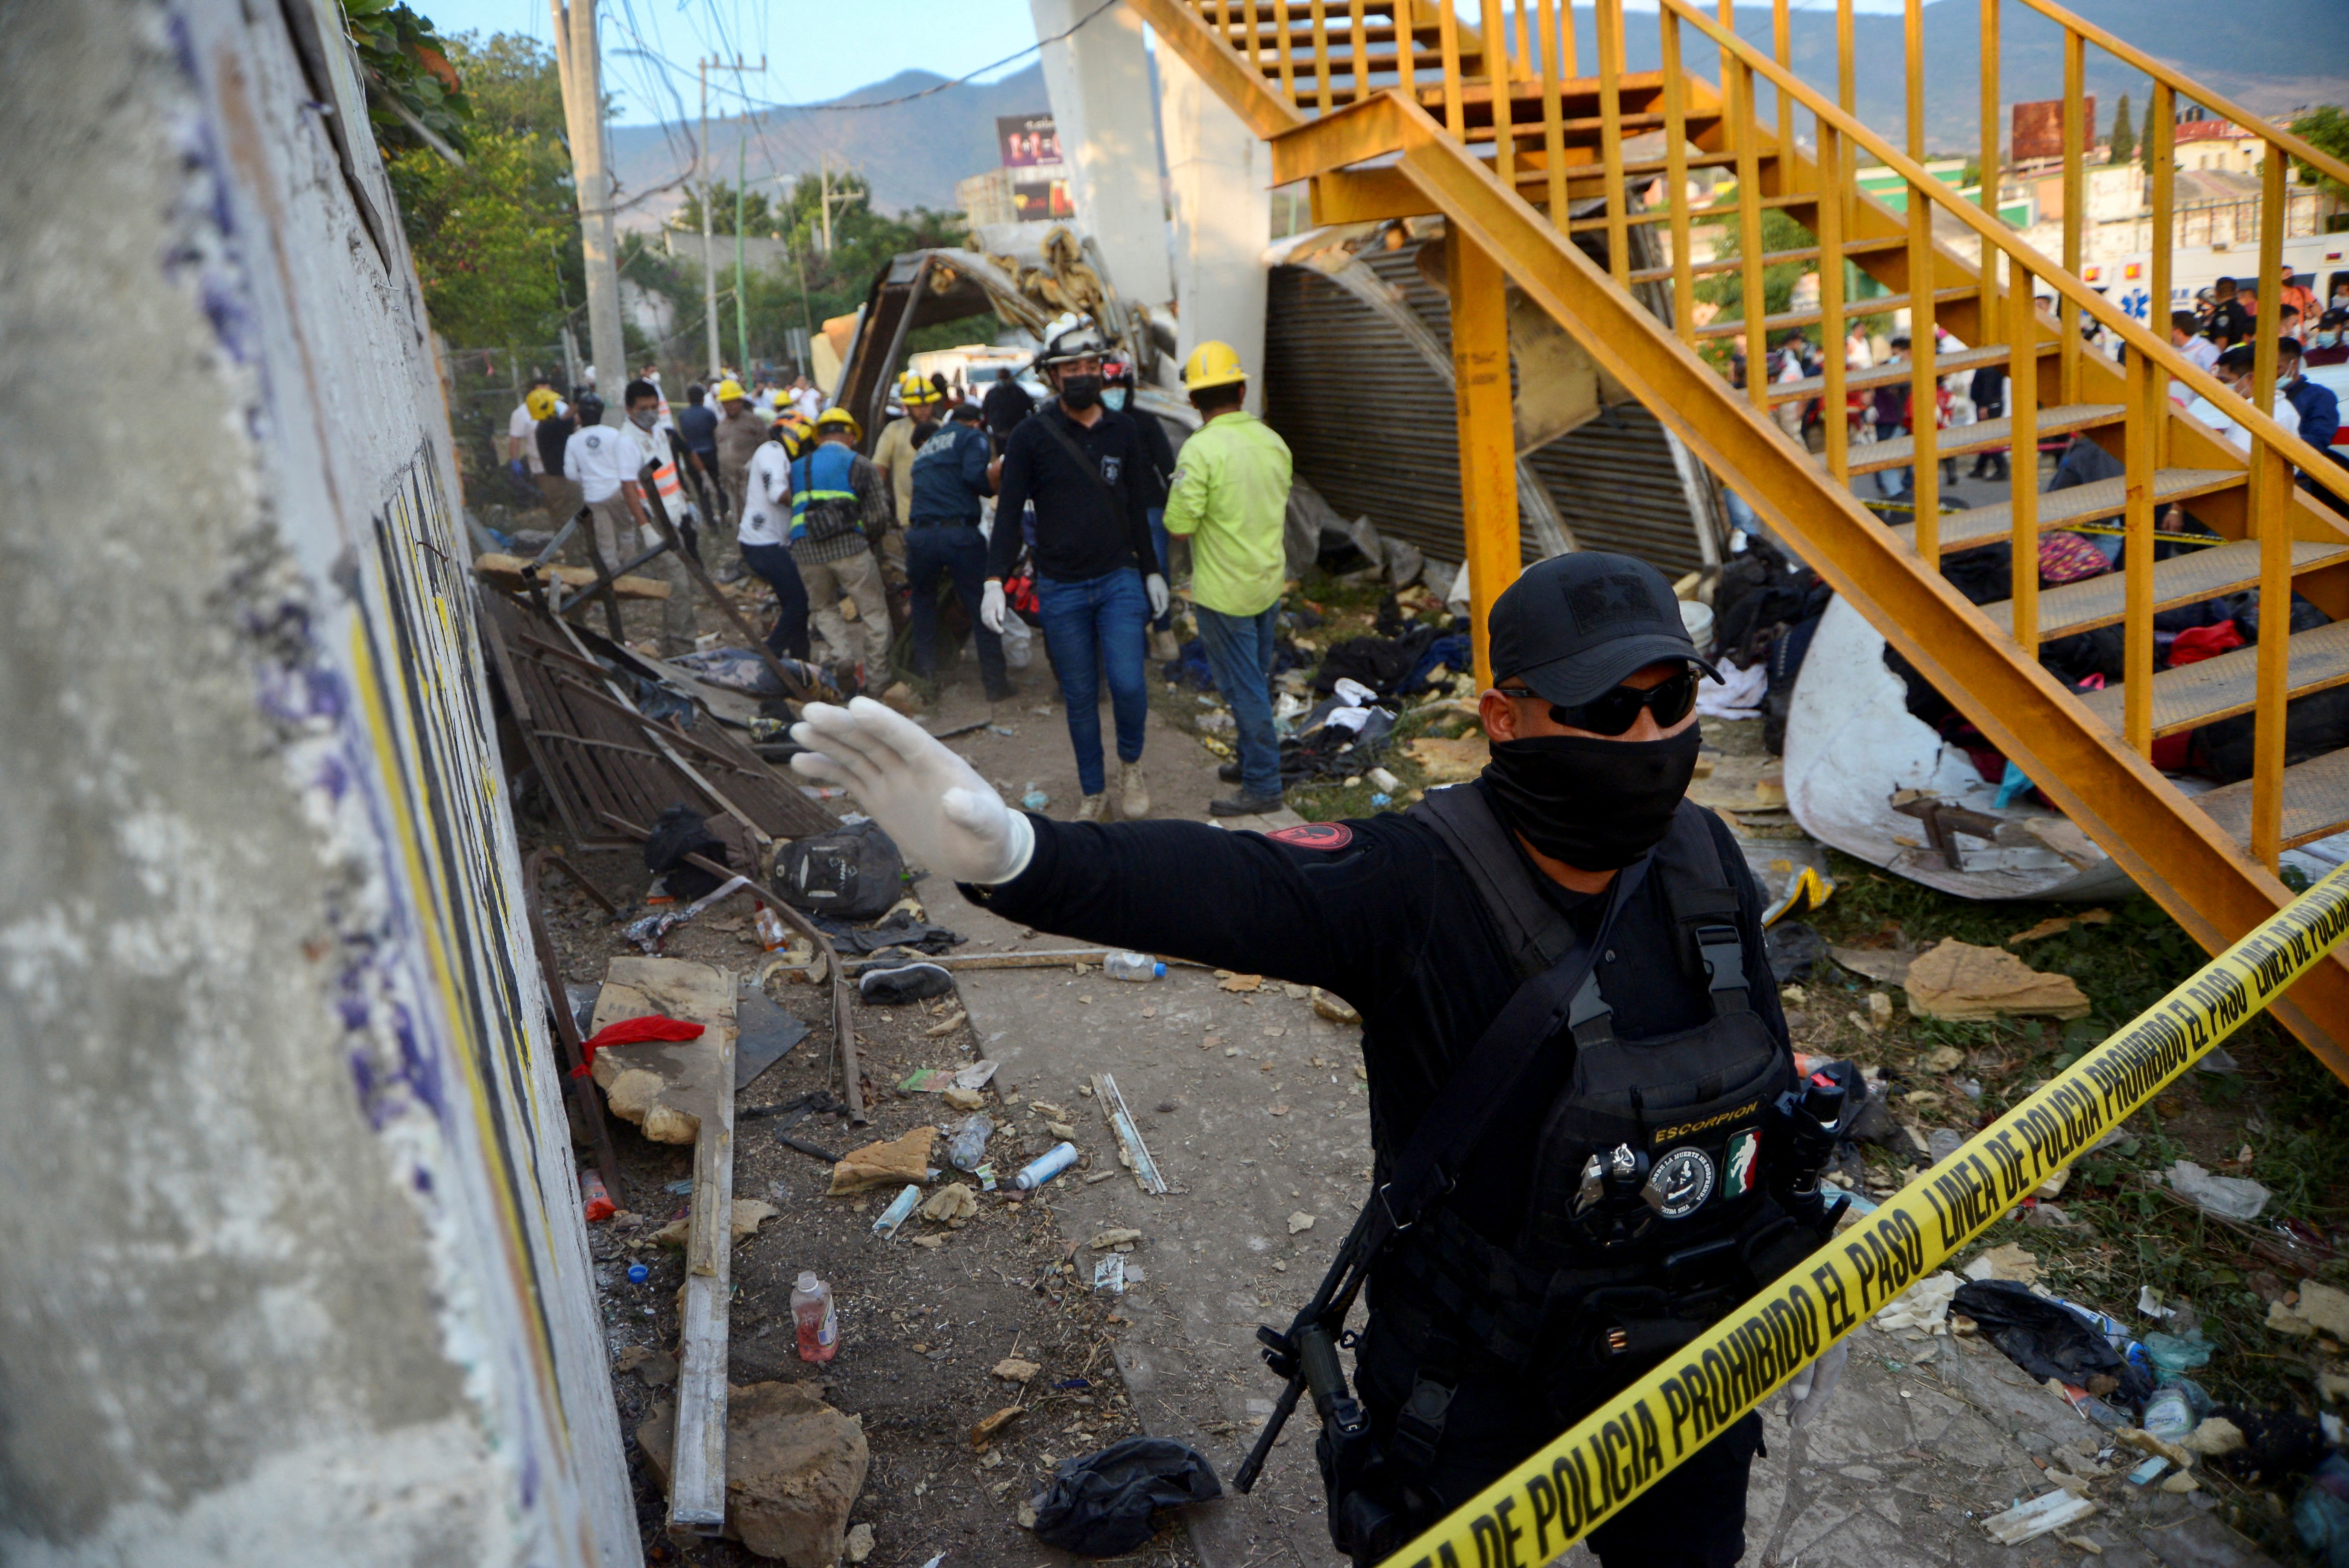 A police officer raises his arm to block photographers to to avoid taking pictures at the site of a trailer accident that left at least 49 people dead, most of them migrants from Central America, in Tuxtla Gutierrez, in Chiapas state, Mexico December 9, 2021. REUTERS/Jacob Garcia